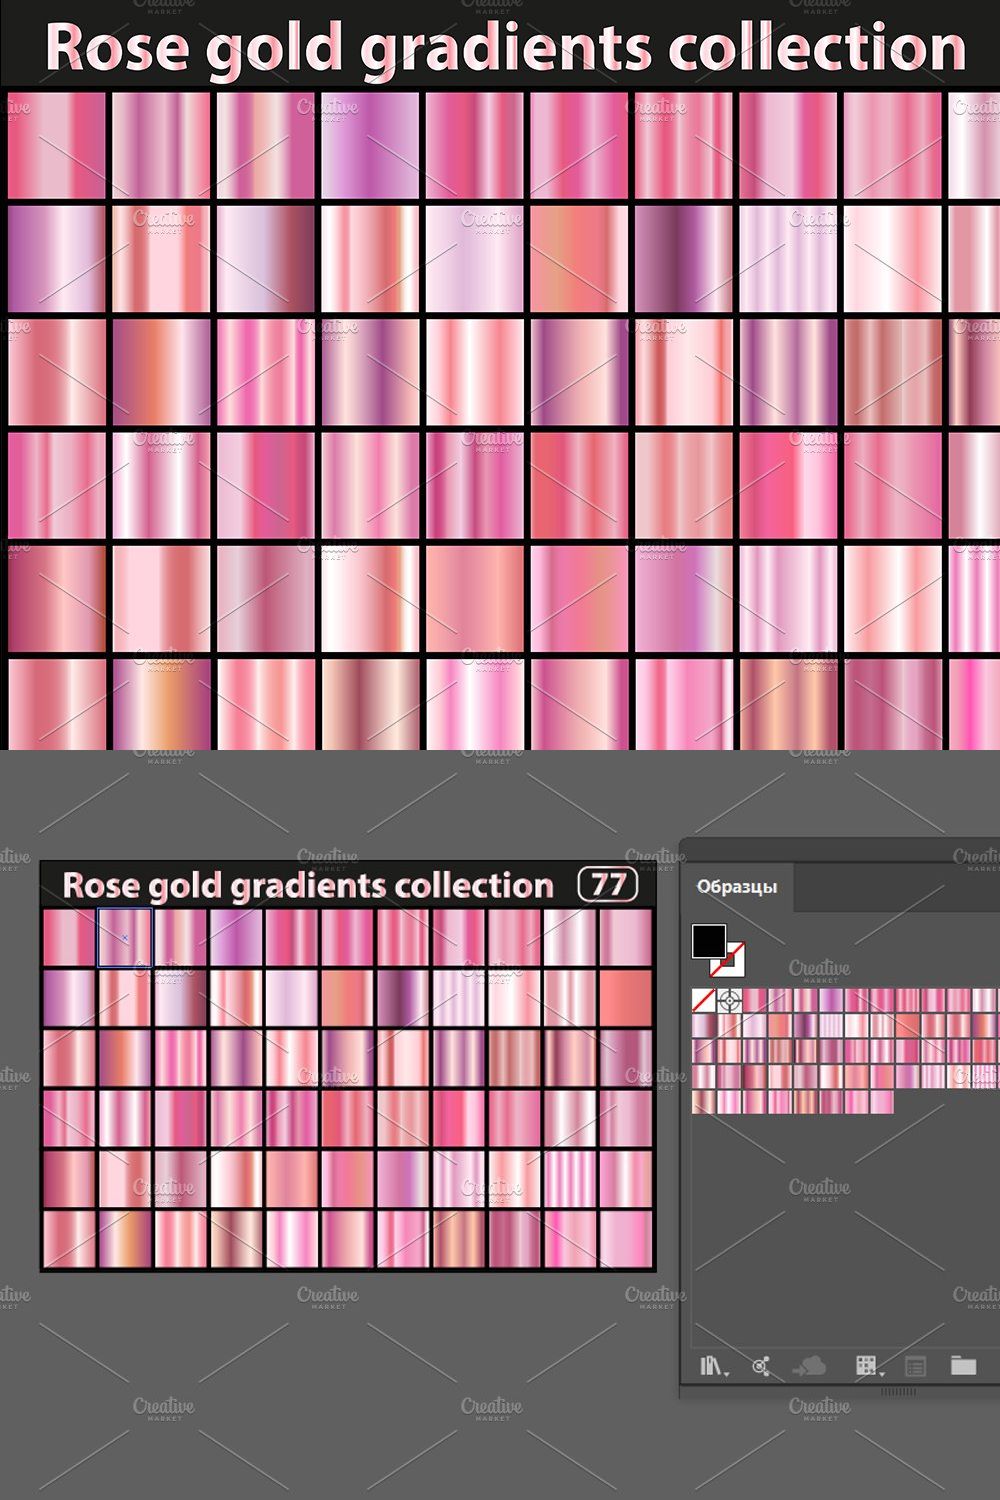 Rose gold gradient collection pinterest preview image.